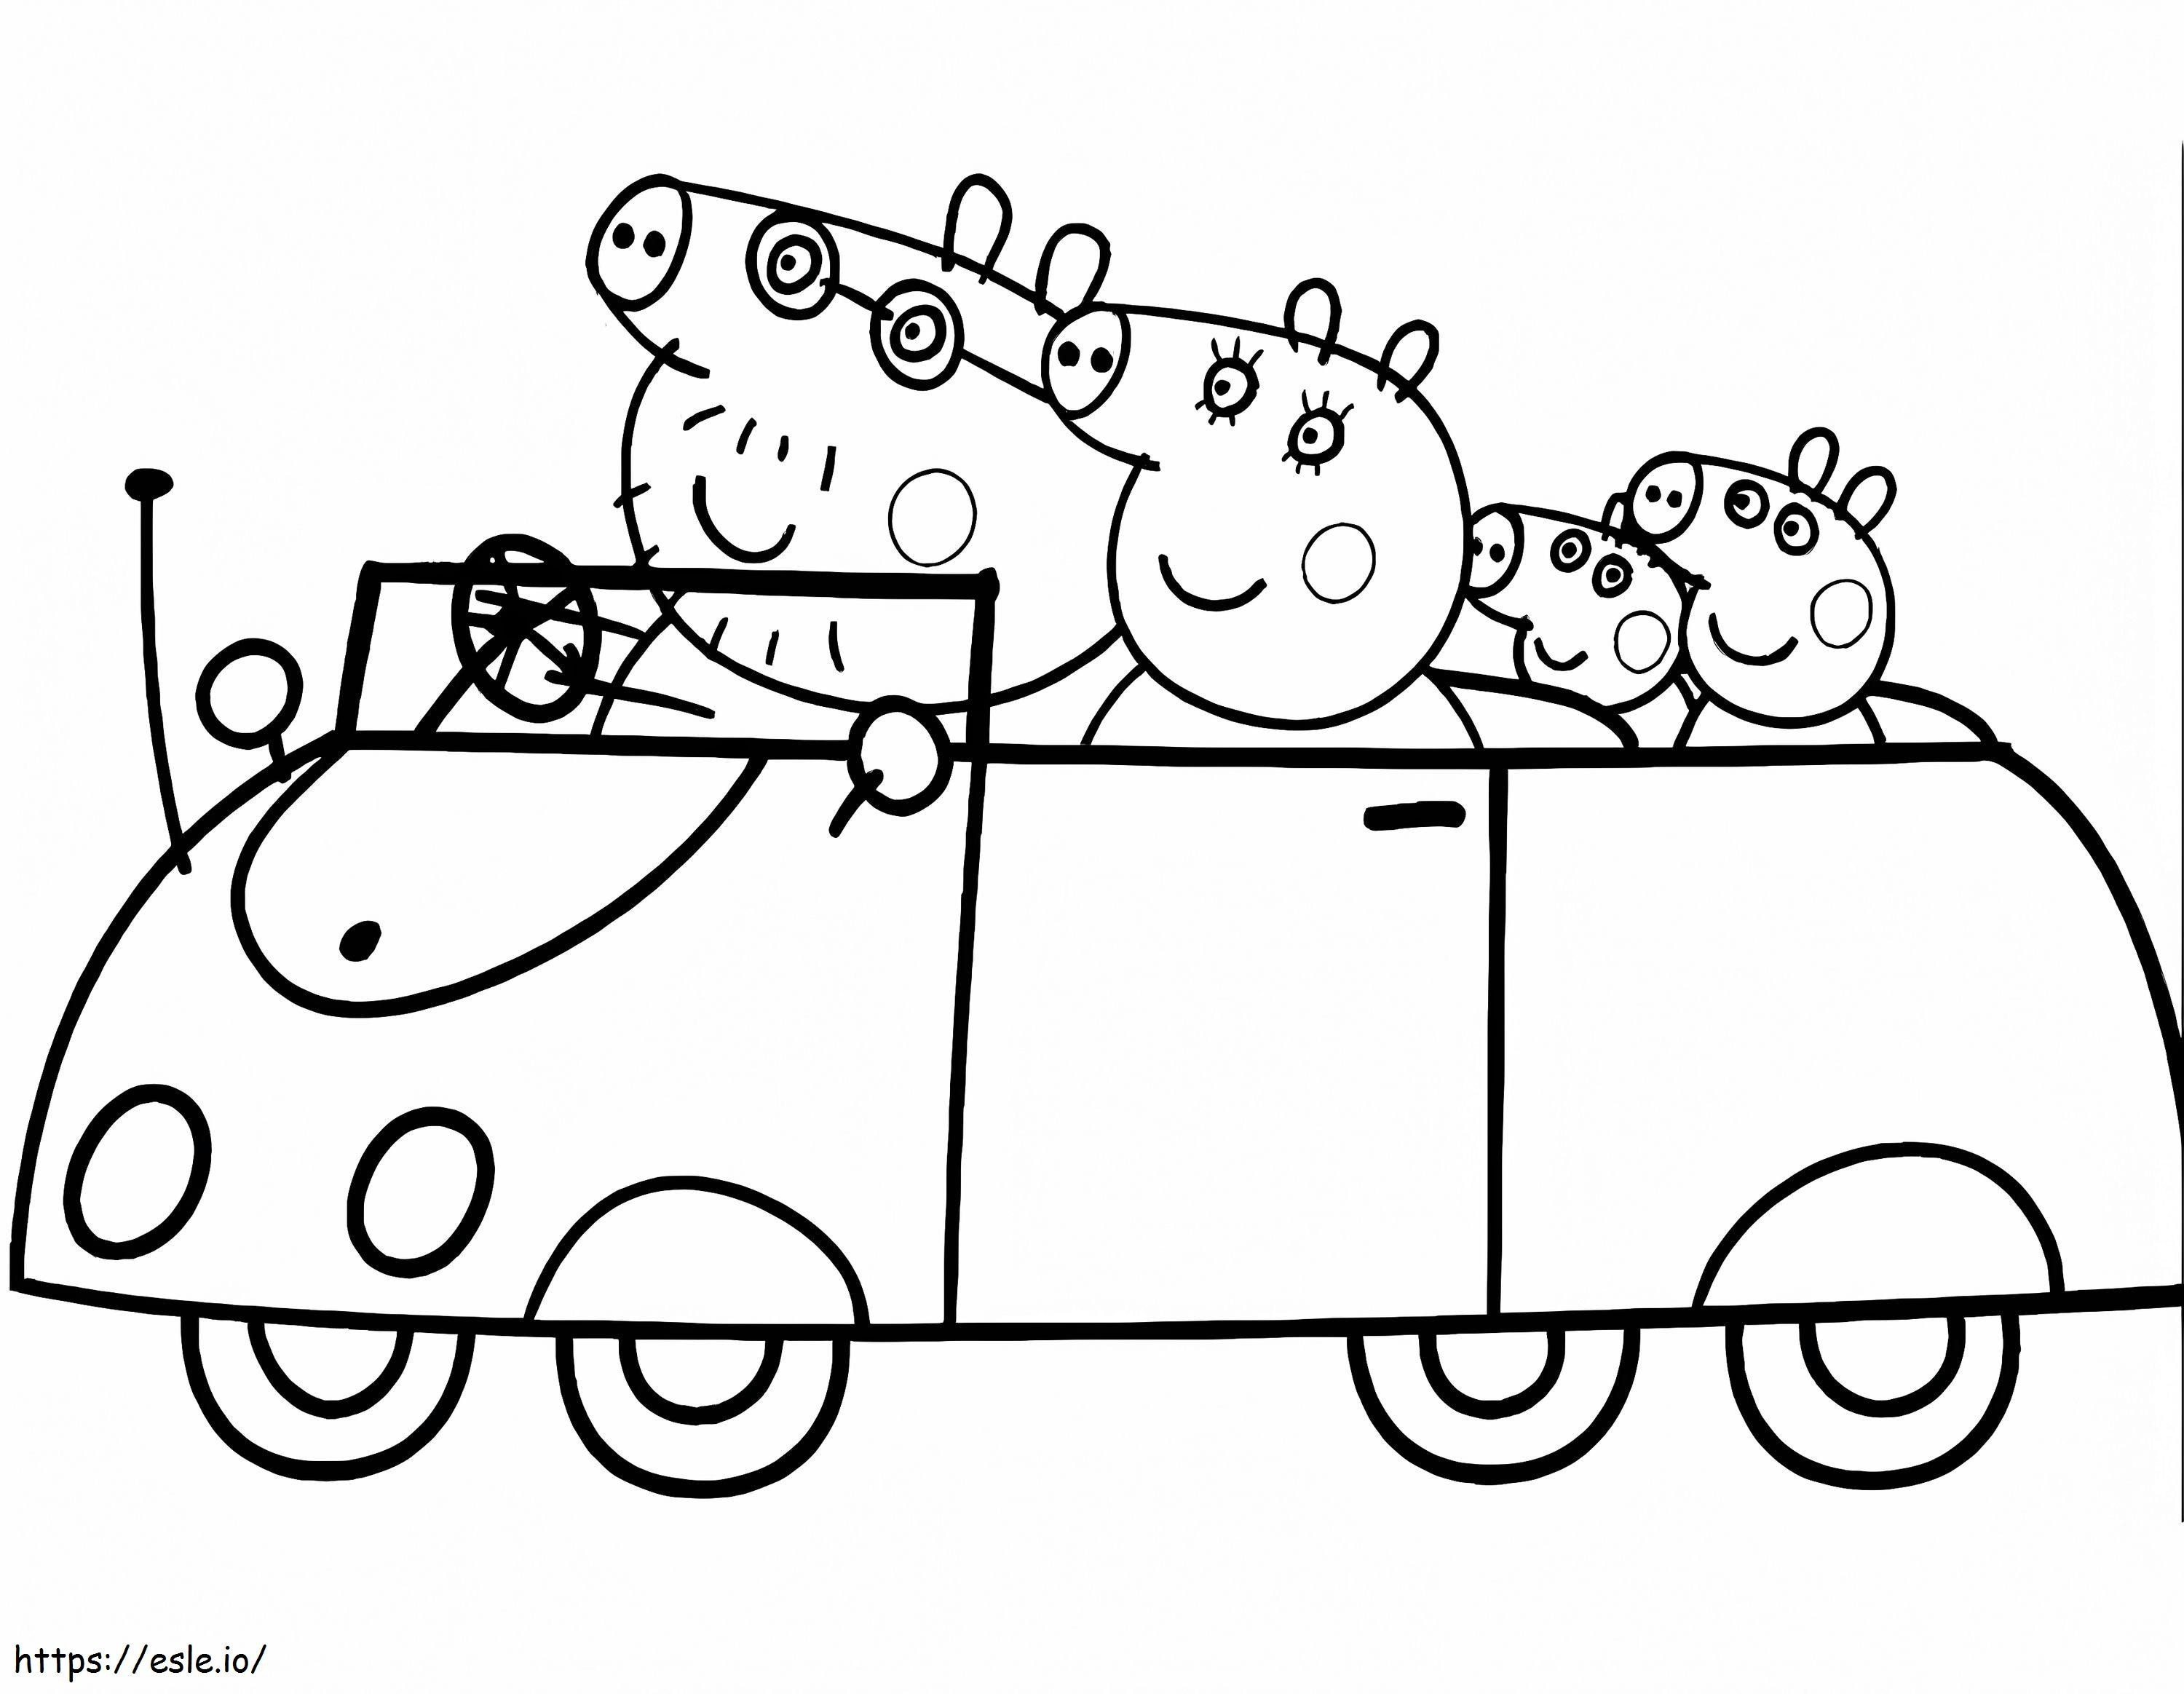 Peppa Pig Family On Vacation coloring page